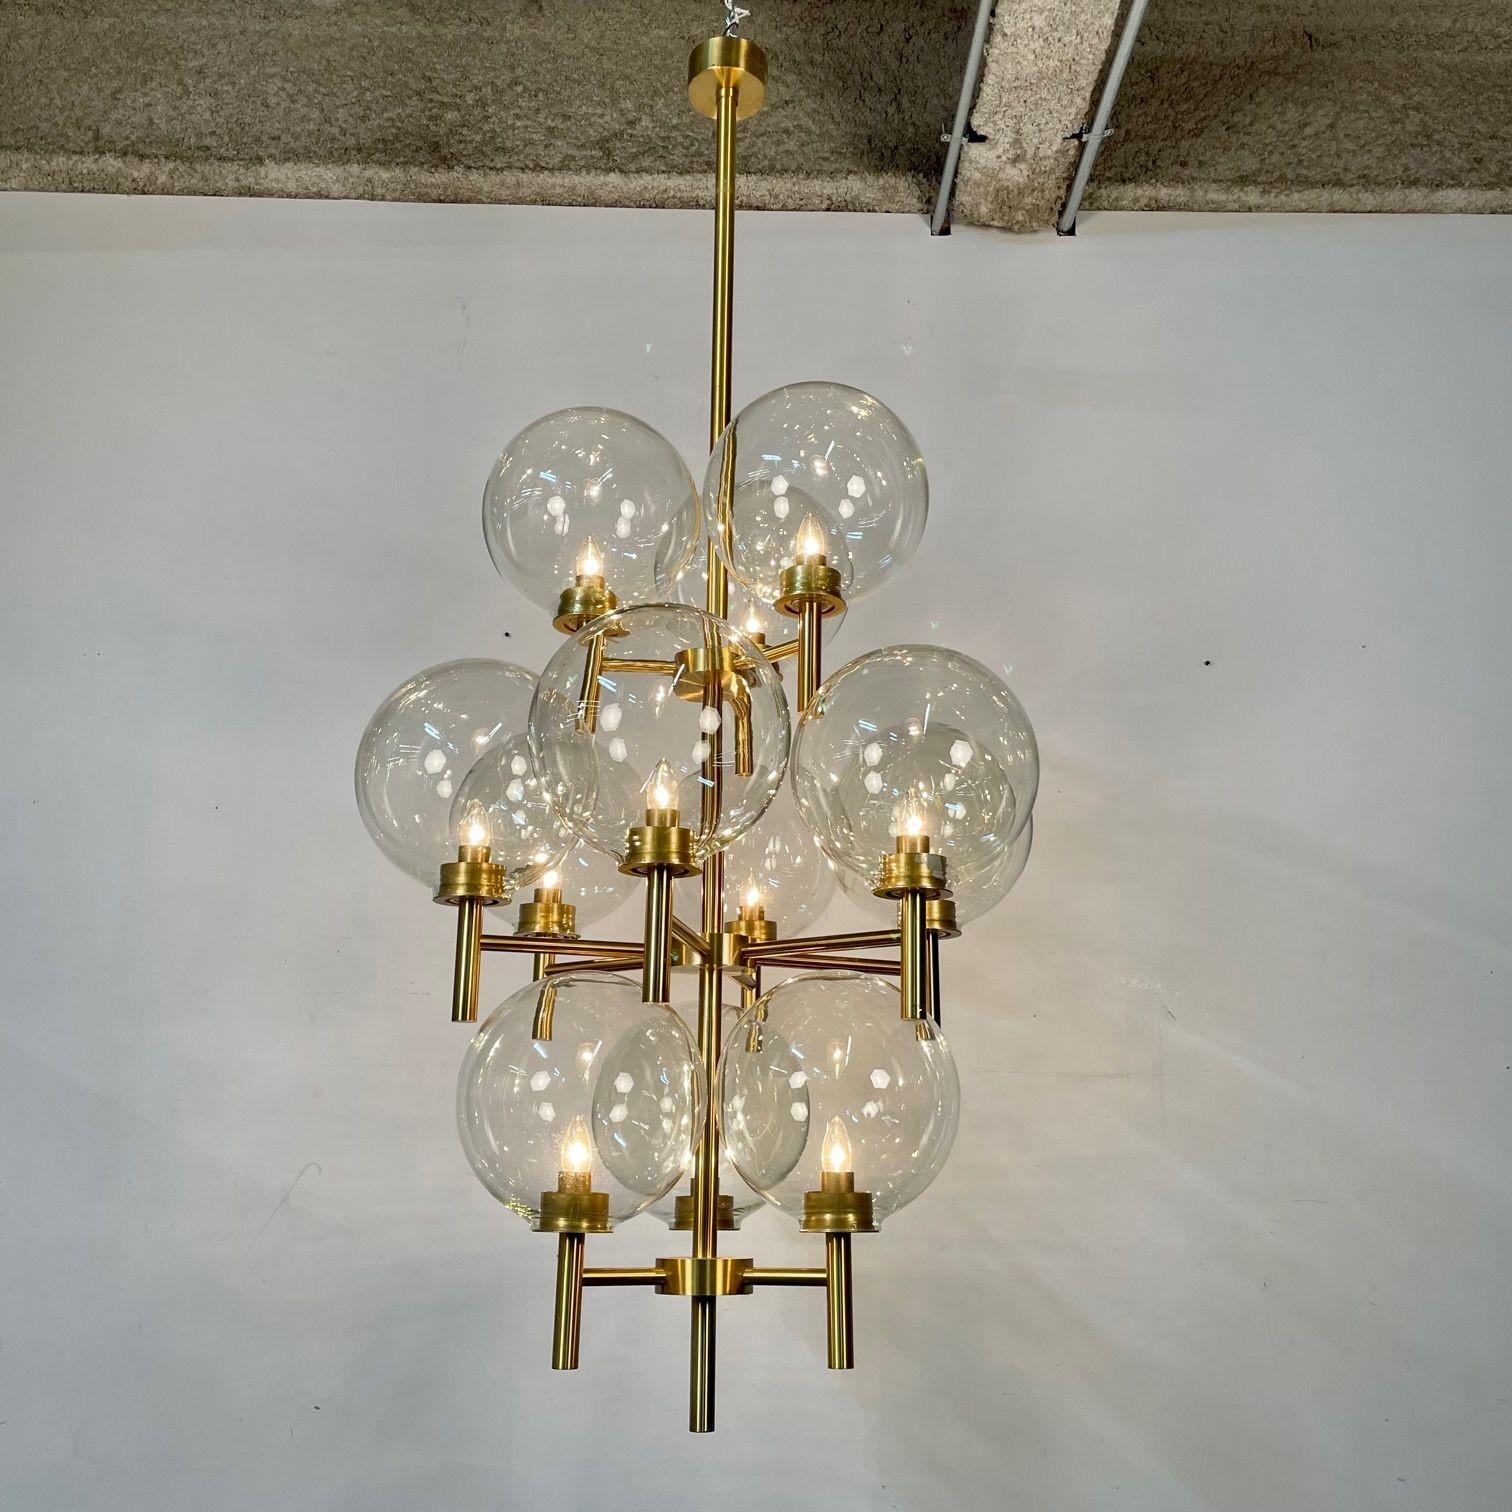 Pair of Monumental Mid-Century Modern Style Chandeliers in Amber Glass and Brass In Good Condition For Sale In Stamford, CT